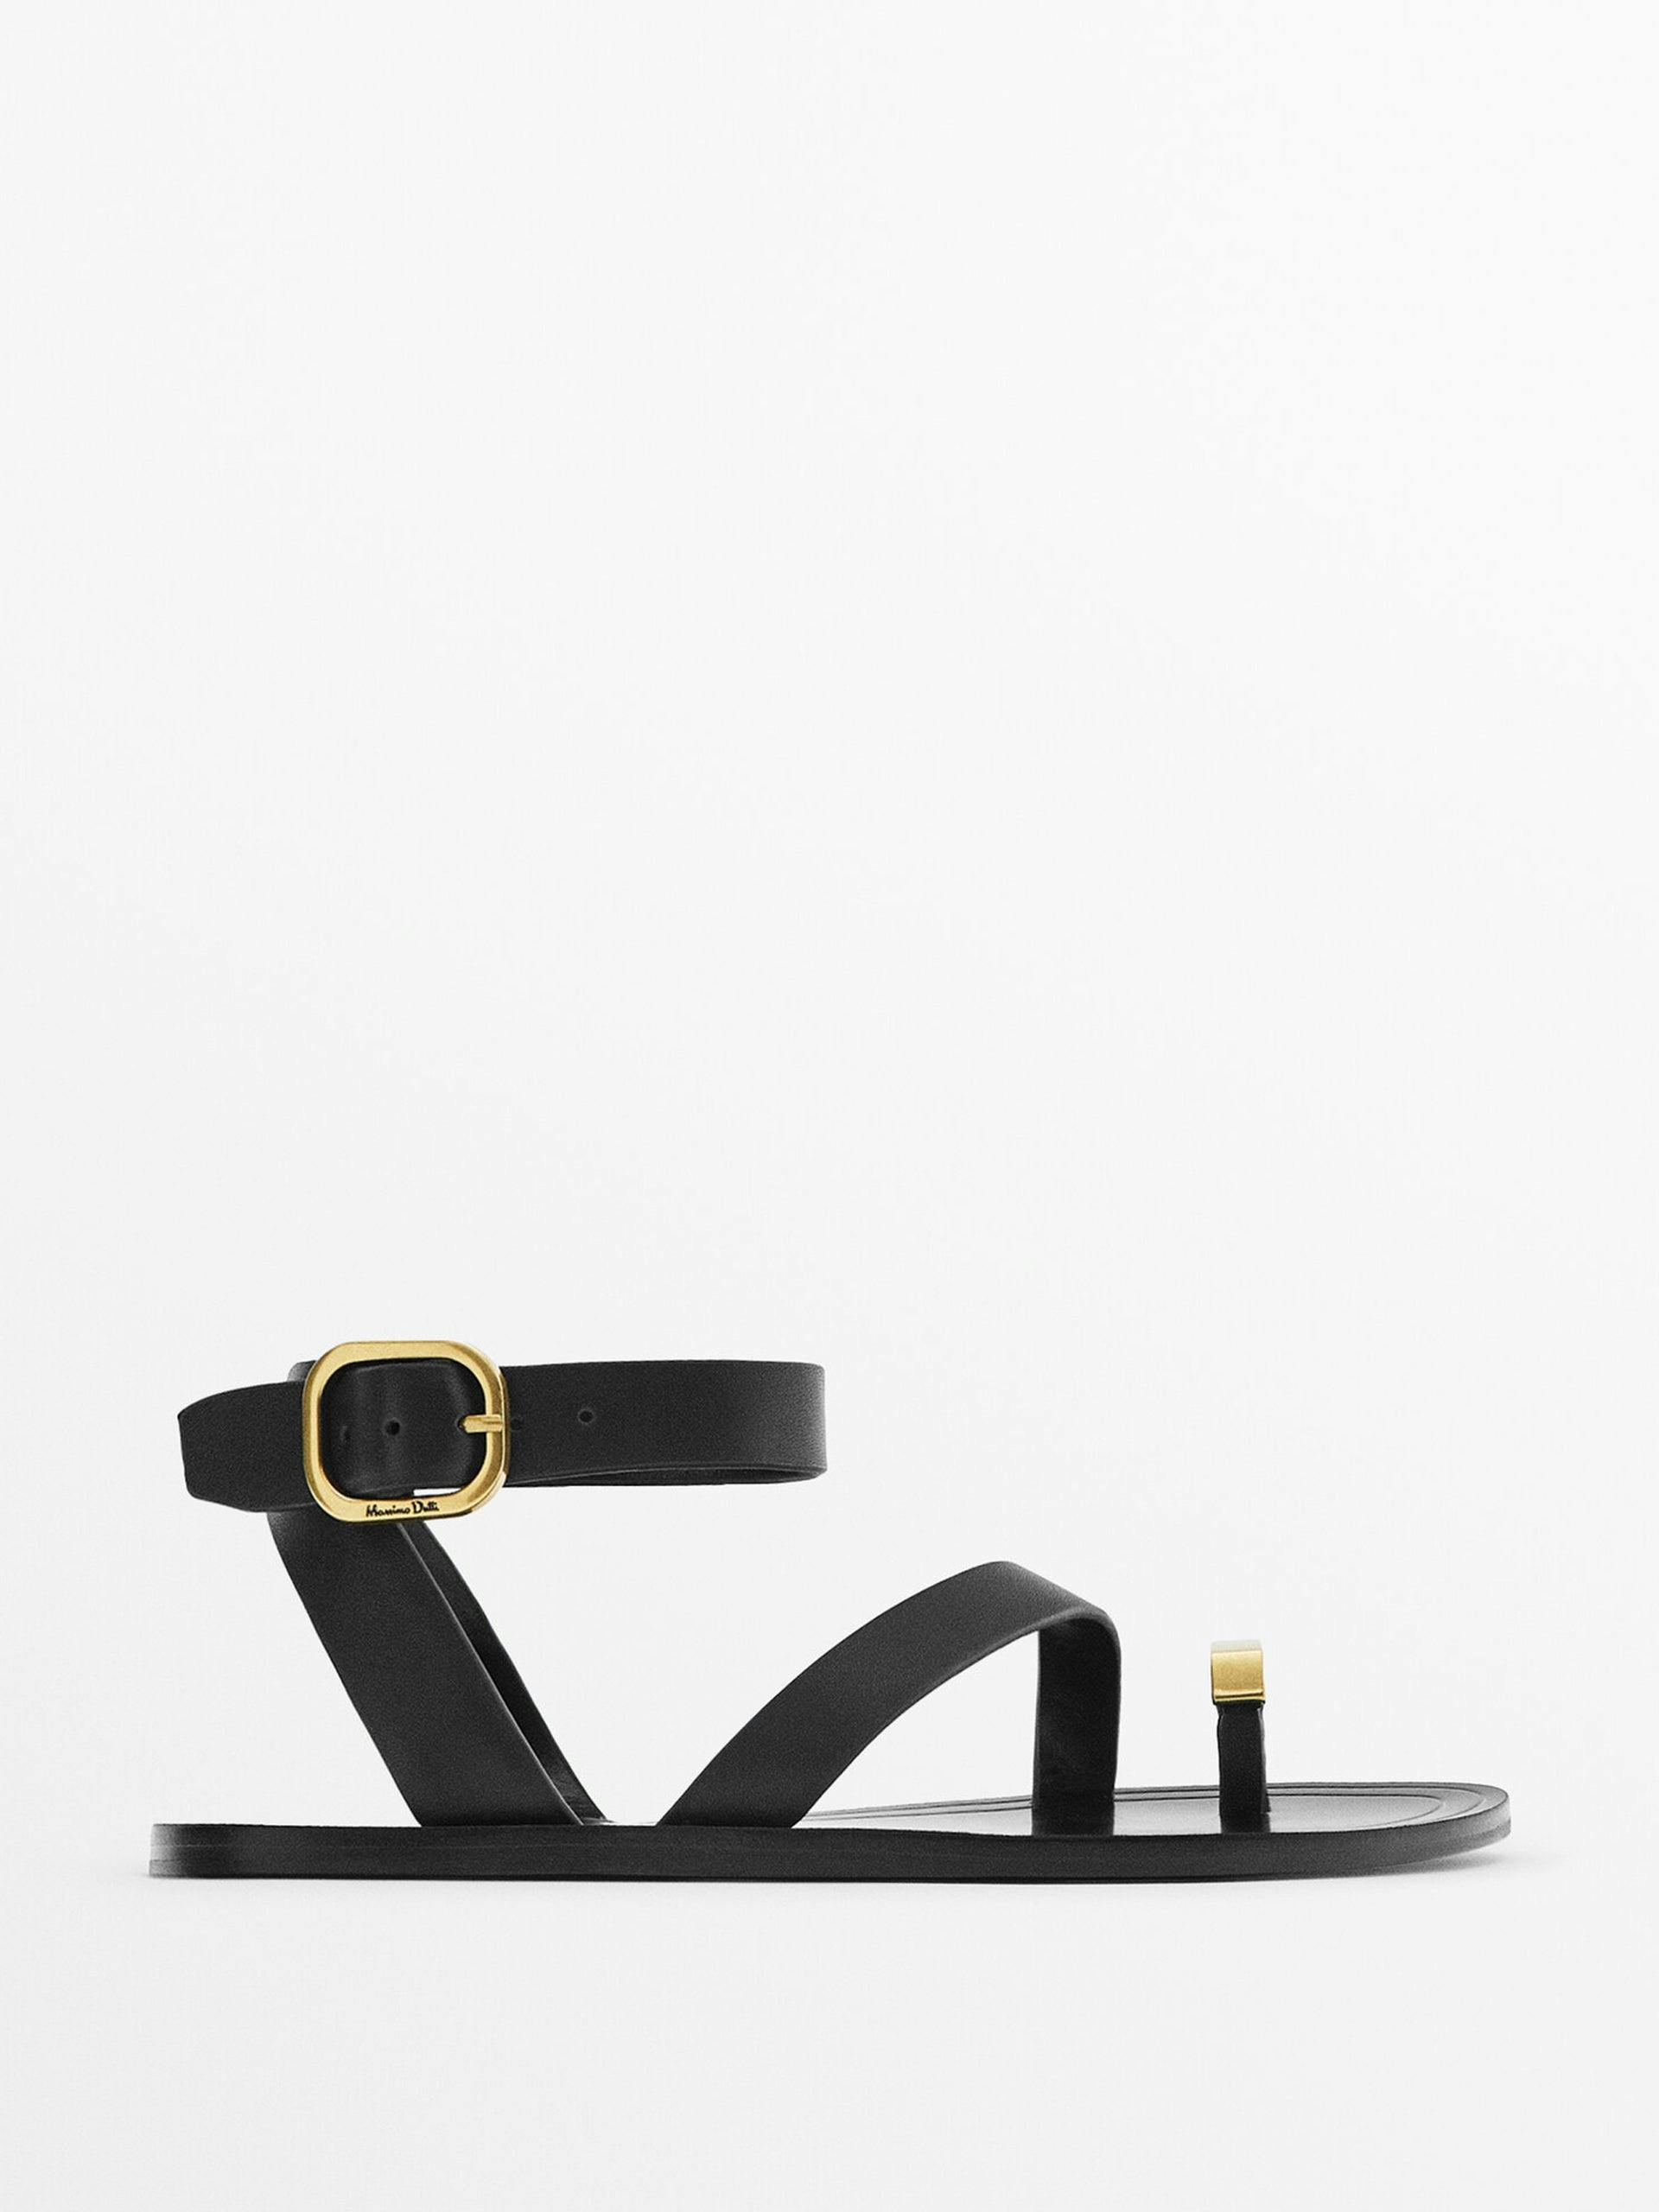 Leather sandals with metallic detailing